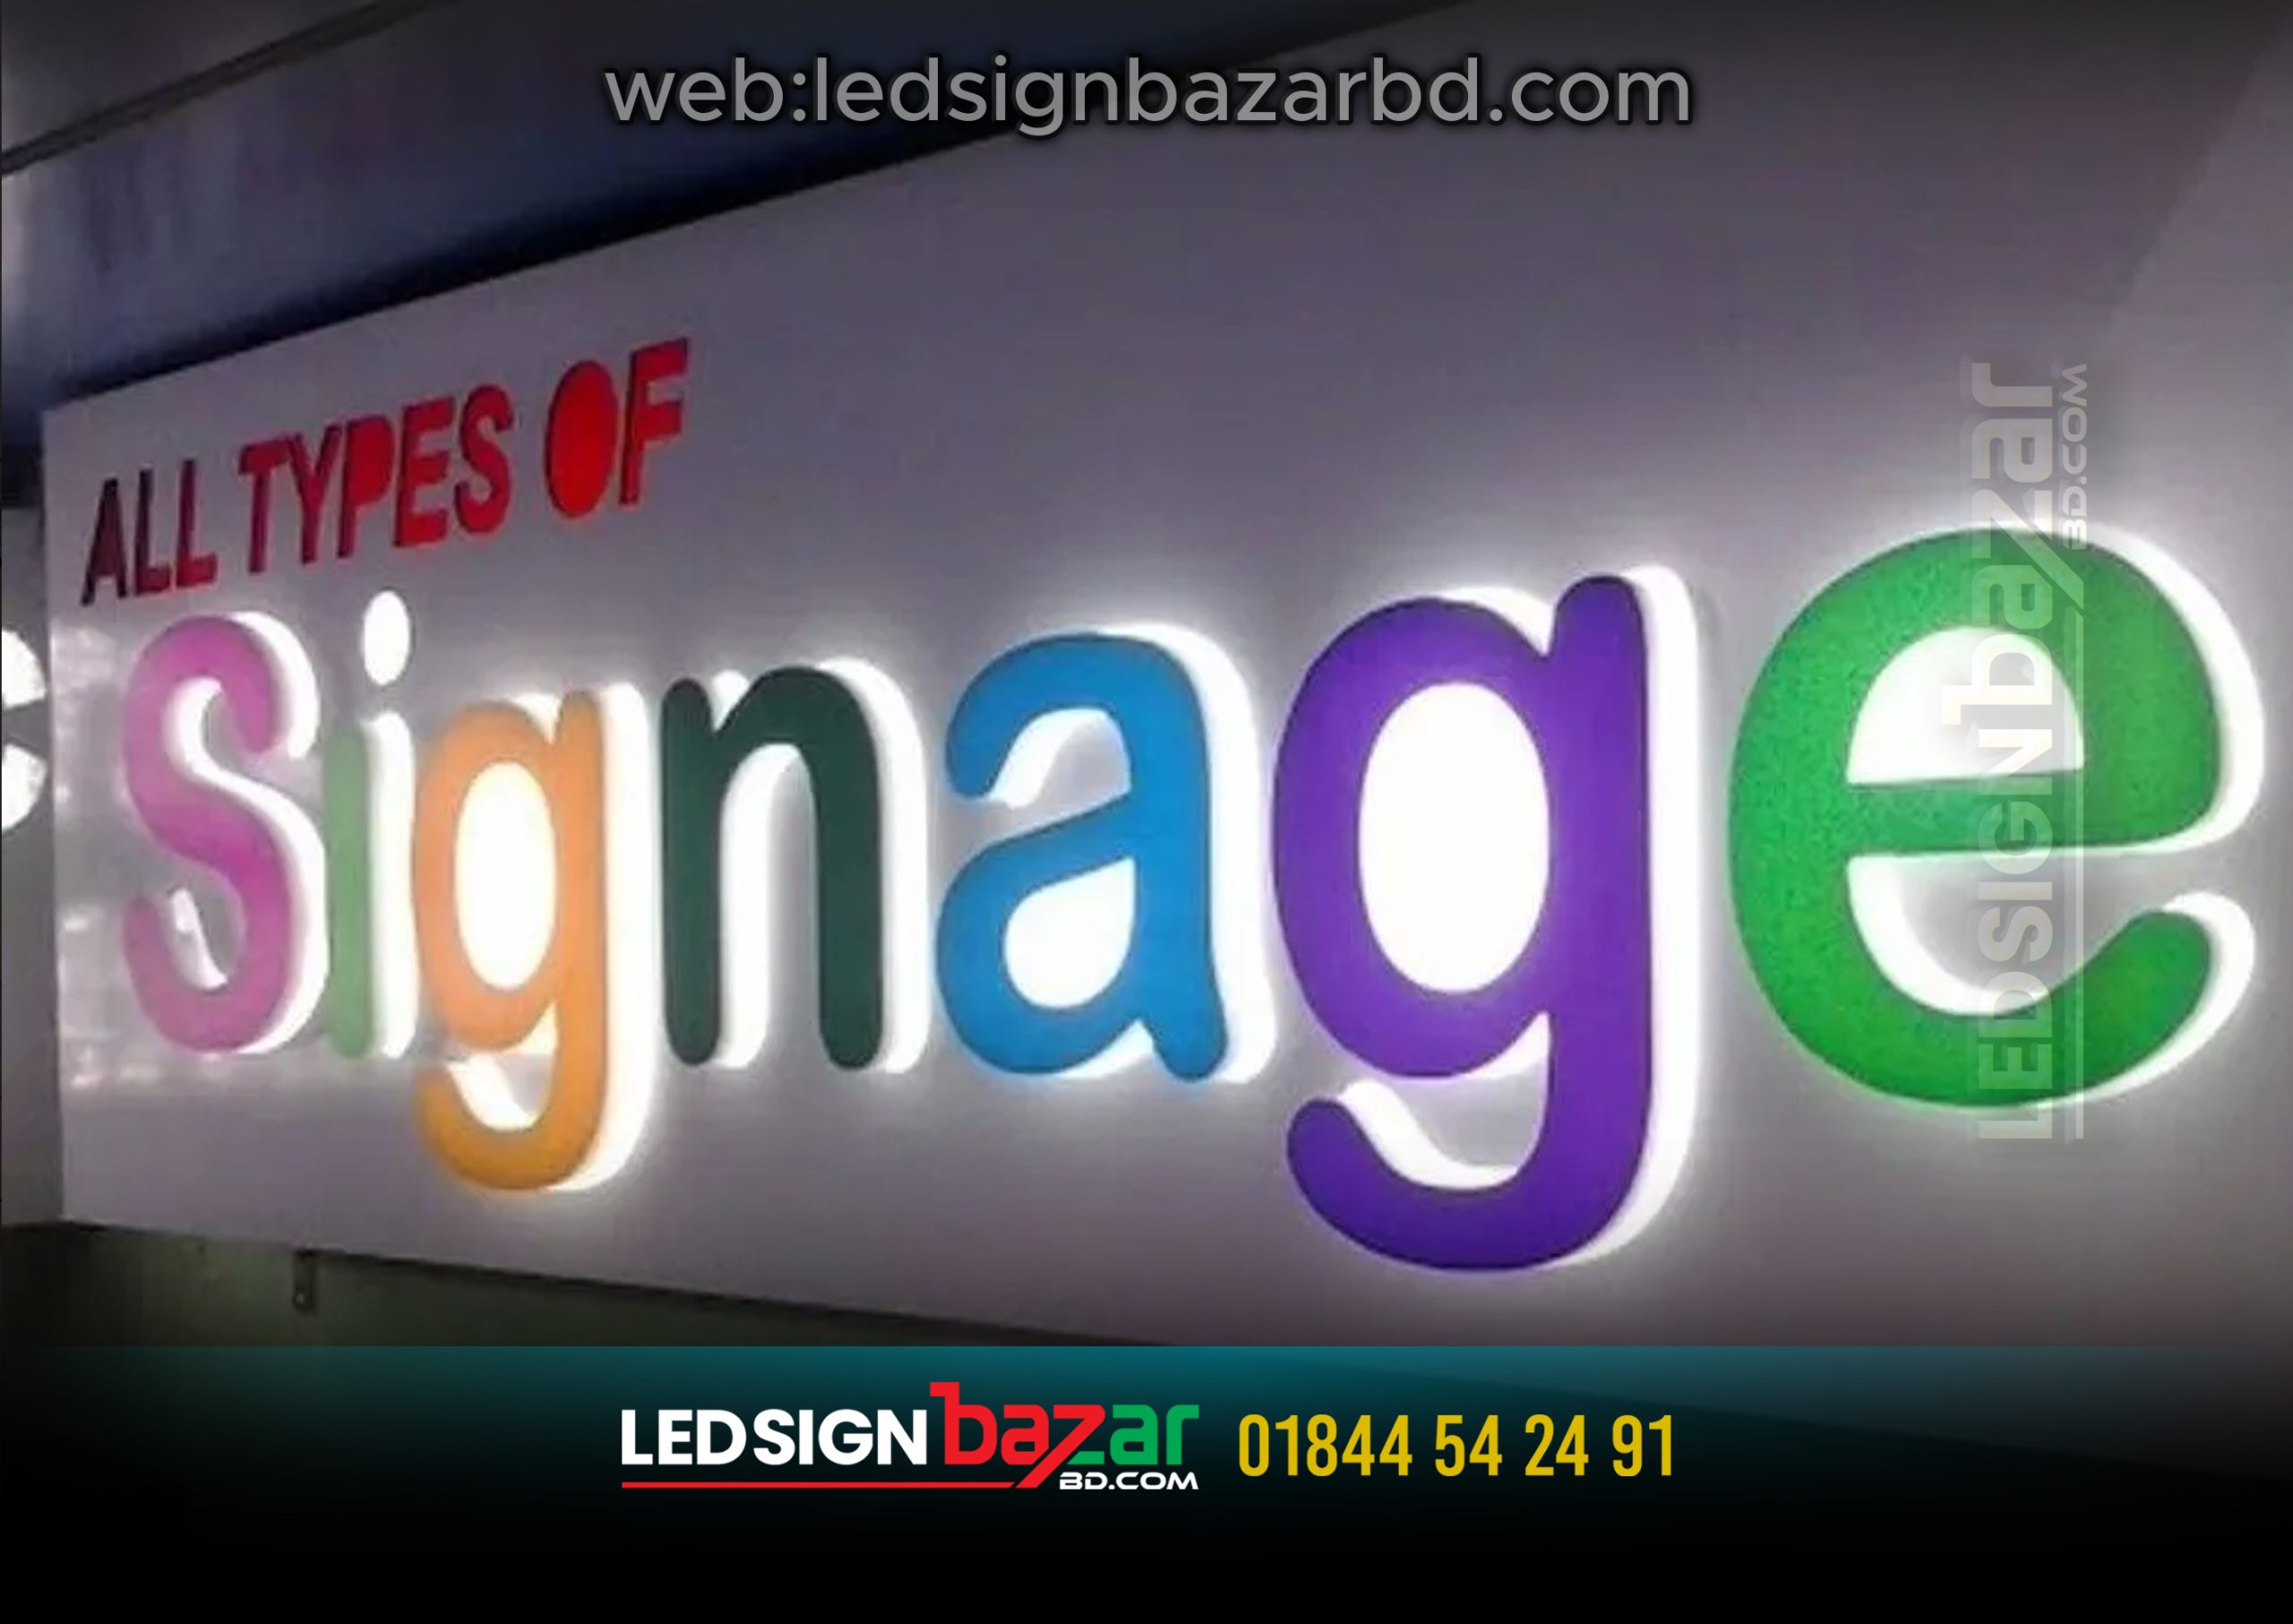 LETTER SIGNAGE, MULTI COLOR ACRYLIC 3D LETTER MAKING AND MANUFACTURER IN DHAKA BANGLADESH.